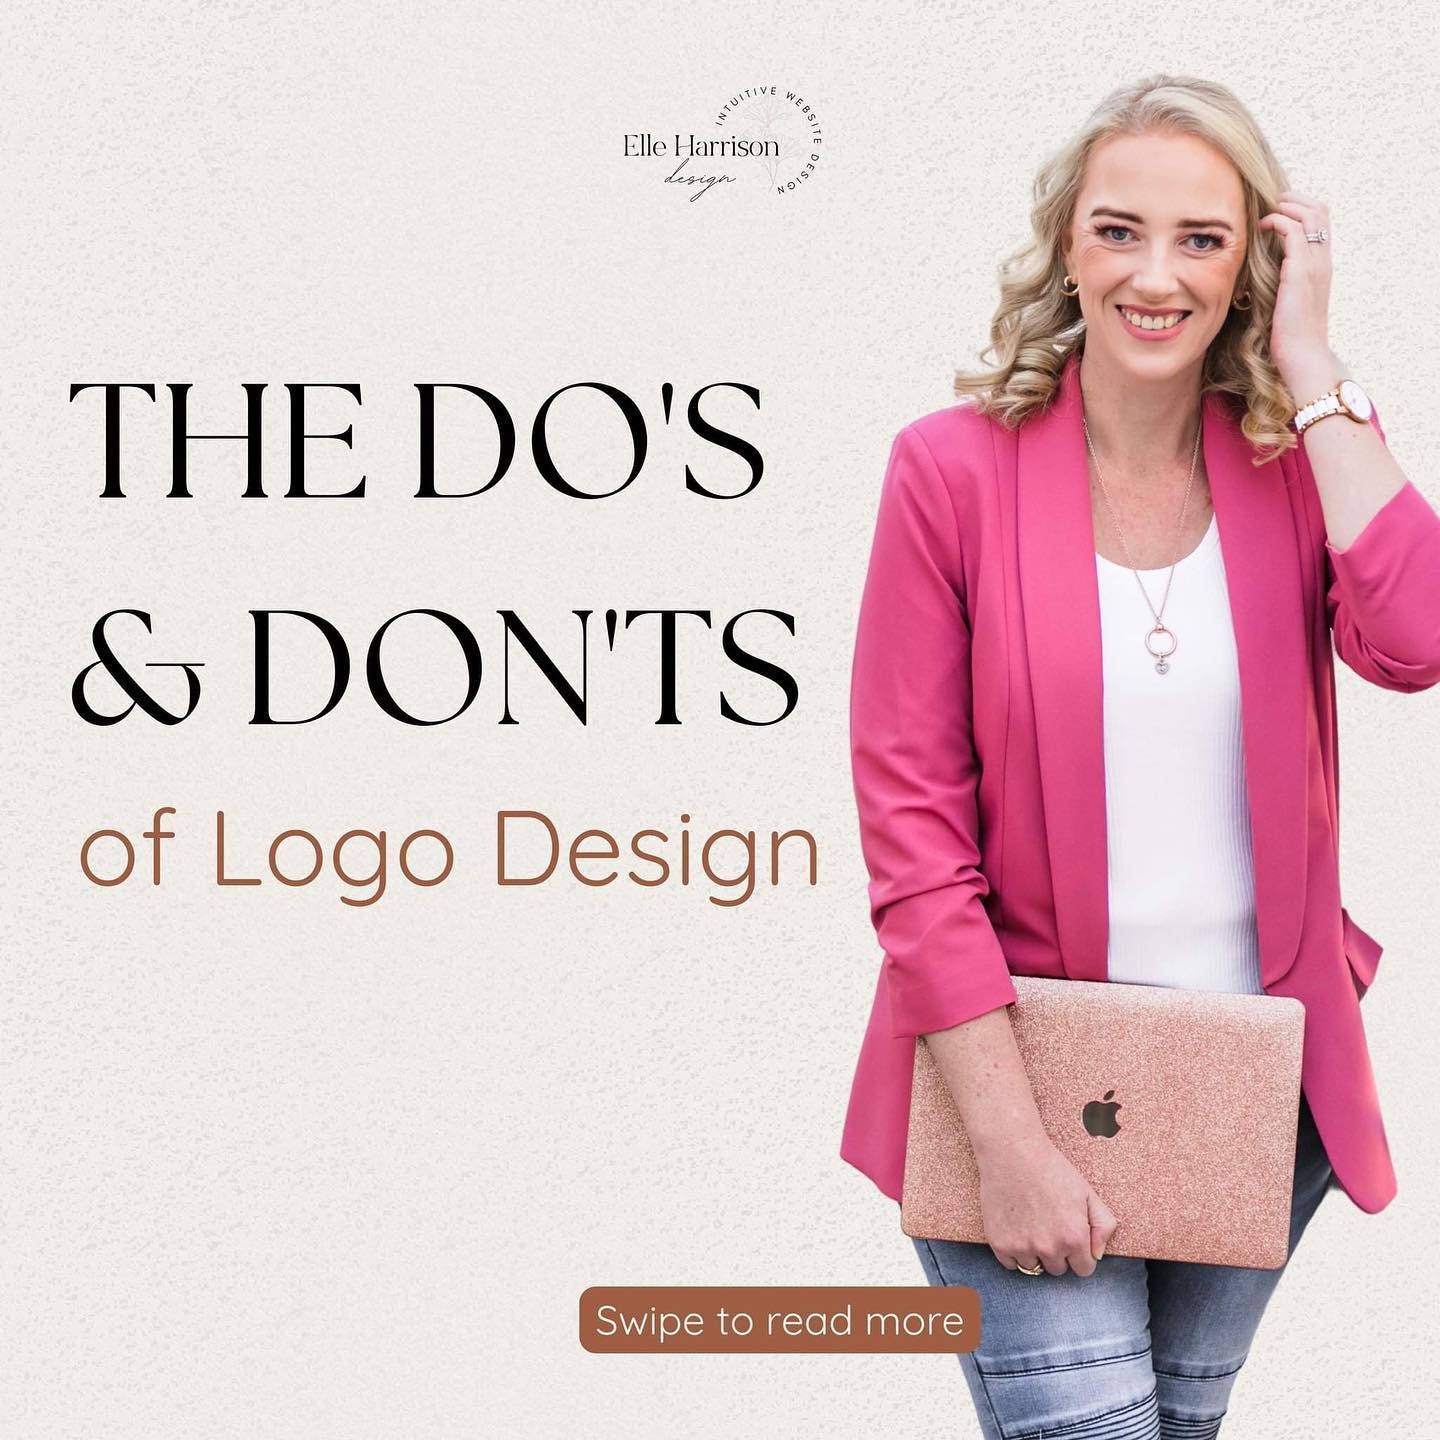 There is a common misconception that logo design is simply creating a visually pleasing design. 😱

But the truth is, there is much more to designing a successful logo than just aesthetics. It requires careful consideration and strategizing to create